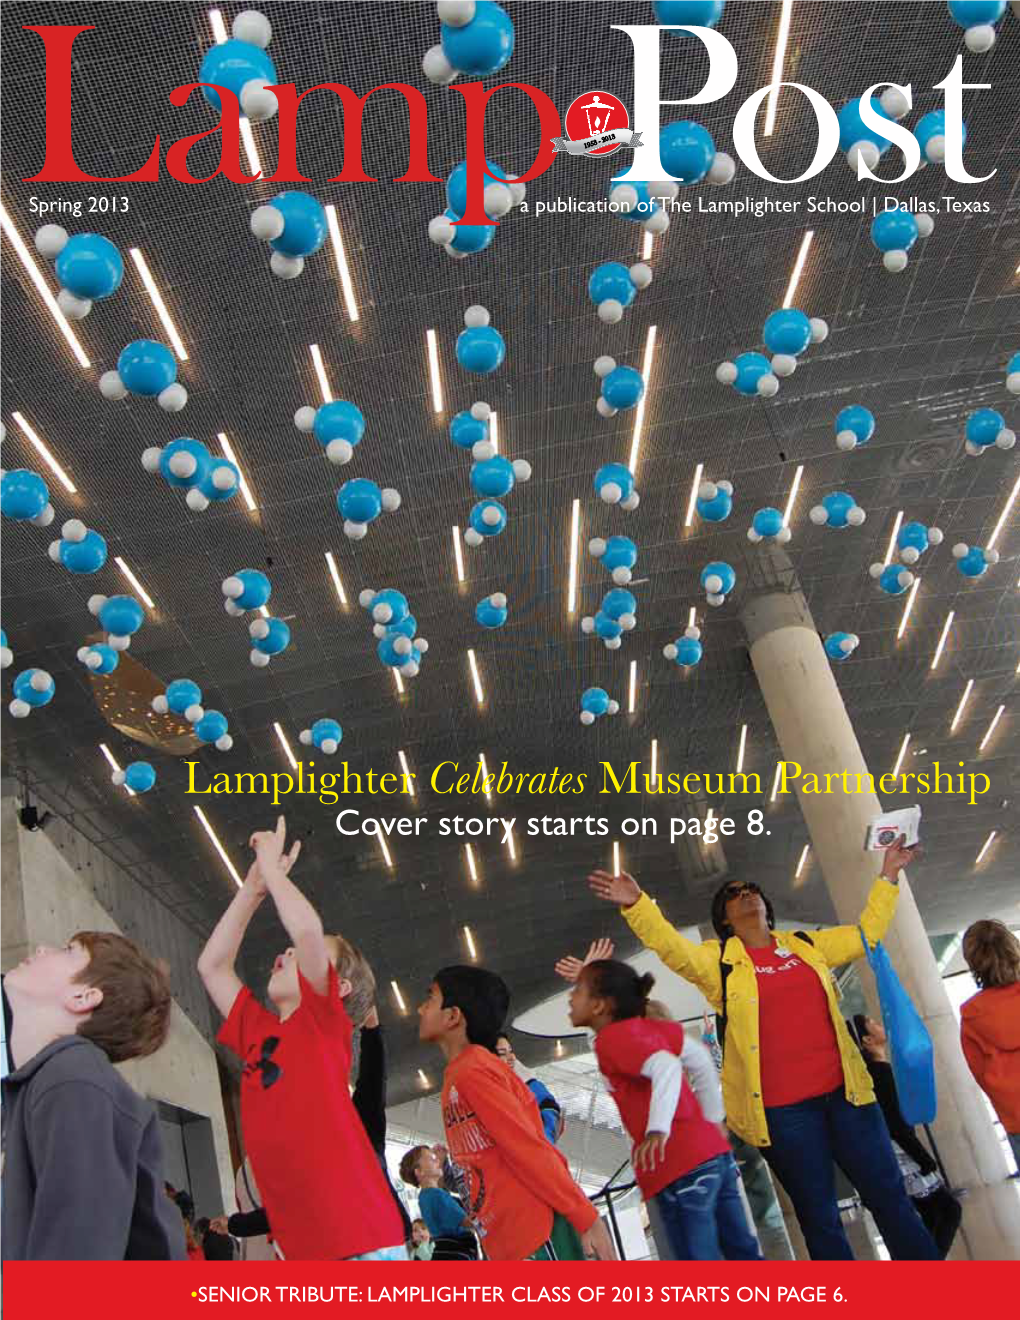 Lamplighter Celebrates Museum Partnership Cover Story Starts on Page 8